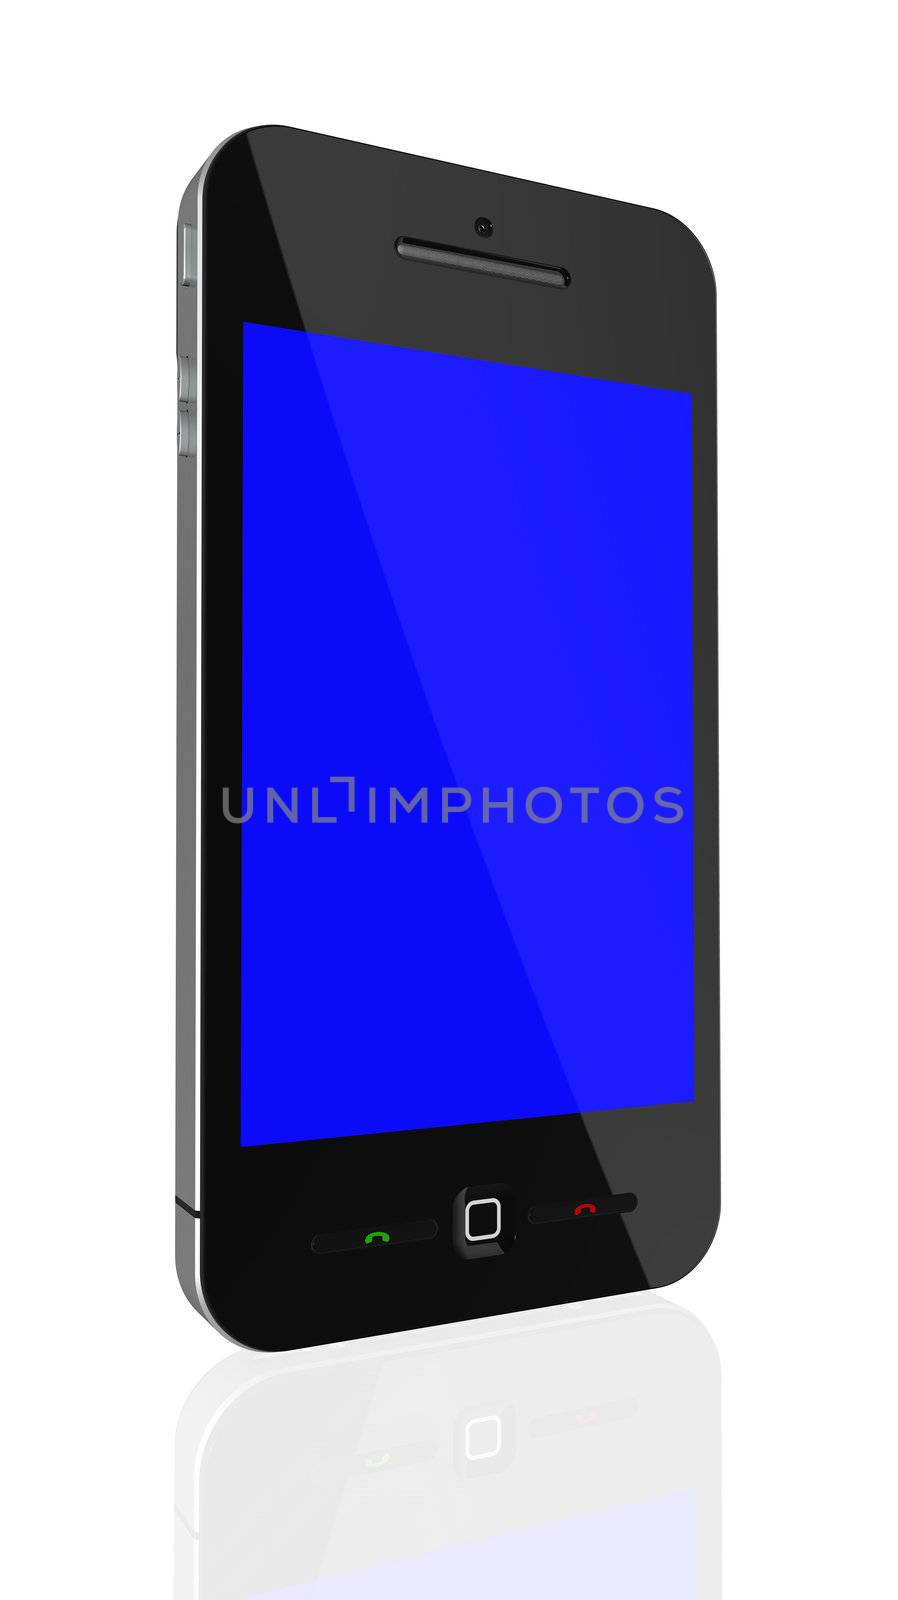 Modern phone front view by manaemedia